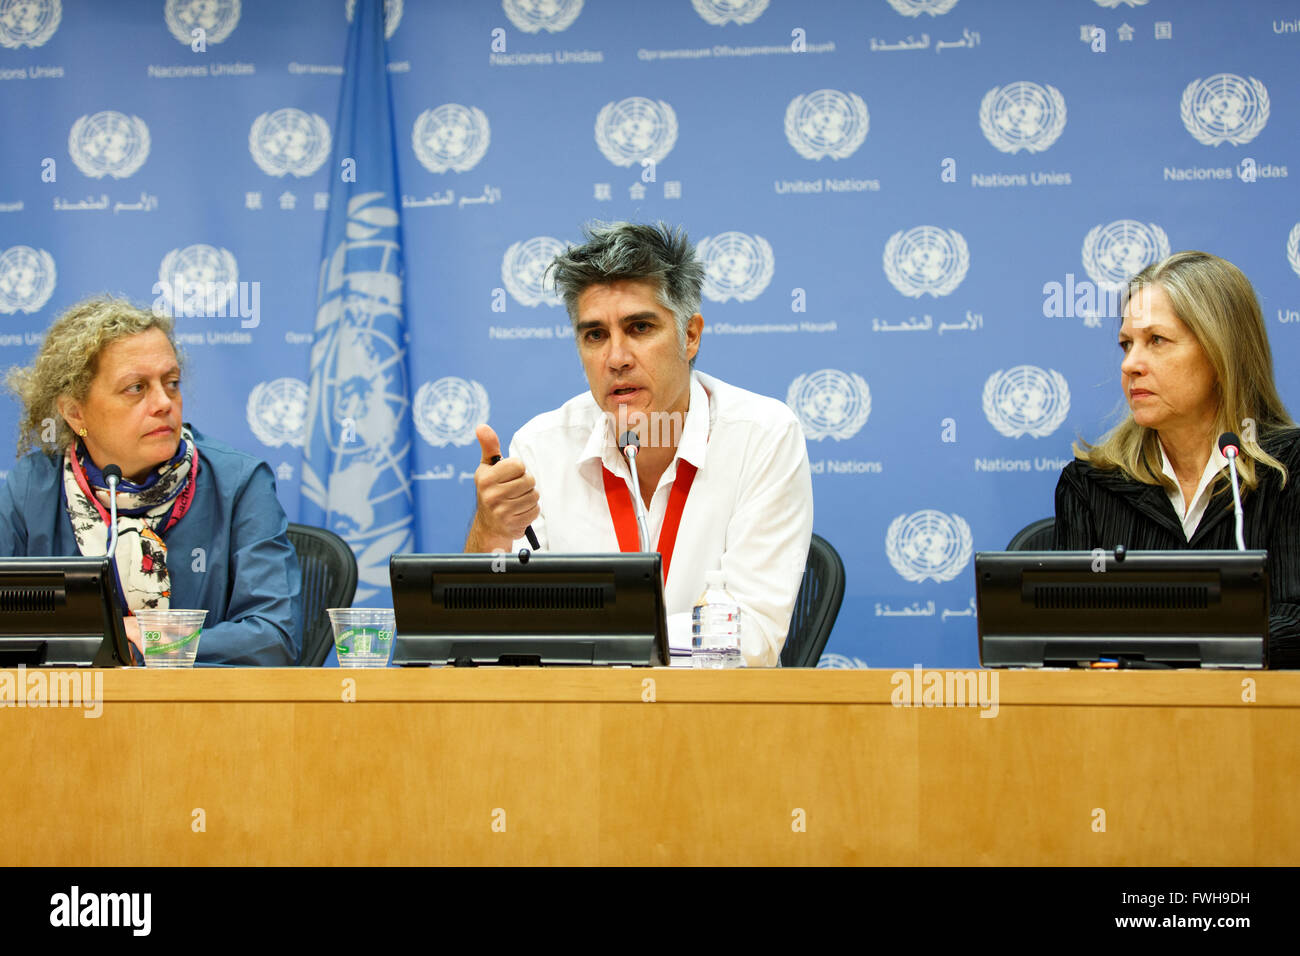 (160405) -- NEW YORK, April 5, 2016 (Xinhua) -- Alejandro Aravena, Chilean architect and winner of the Pritzker Architecture Prize for 2016, briefs journalists on the link between architecture and sustainable development, at the United Nations headquarters in New York, April 5, 2016. He is flanked by Paloma Duran (L), director of the Sustainable Development Goals Fund at the UN Development Programme (UNDP) and Martha Thorne, executive director of the Pritzker Architecture Prize. The Sustainable Development Goals Fund (SDGF) and Pritzker Architecture Prize laureate Alejandro Aravena draw on the Stock Photo